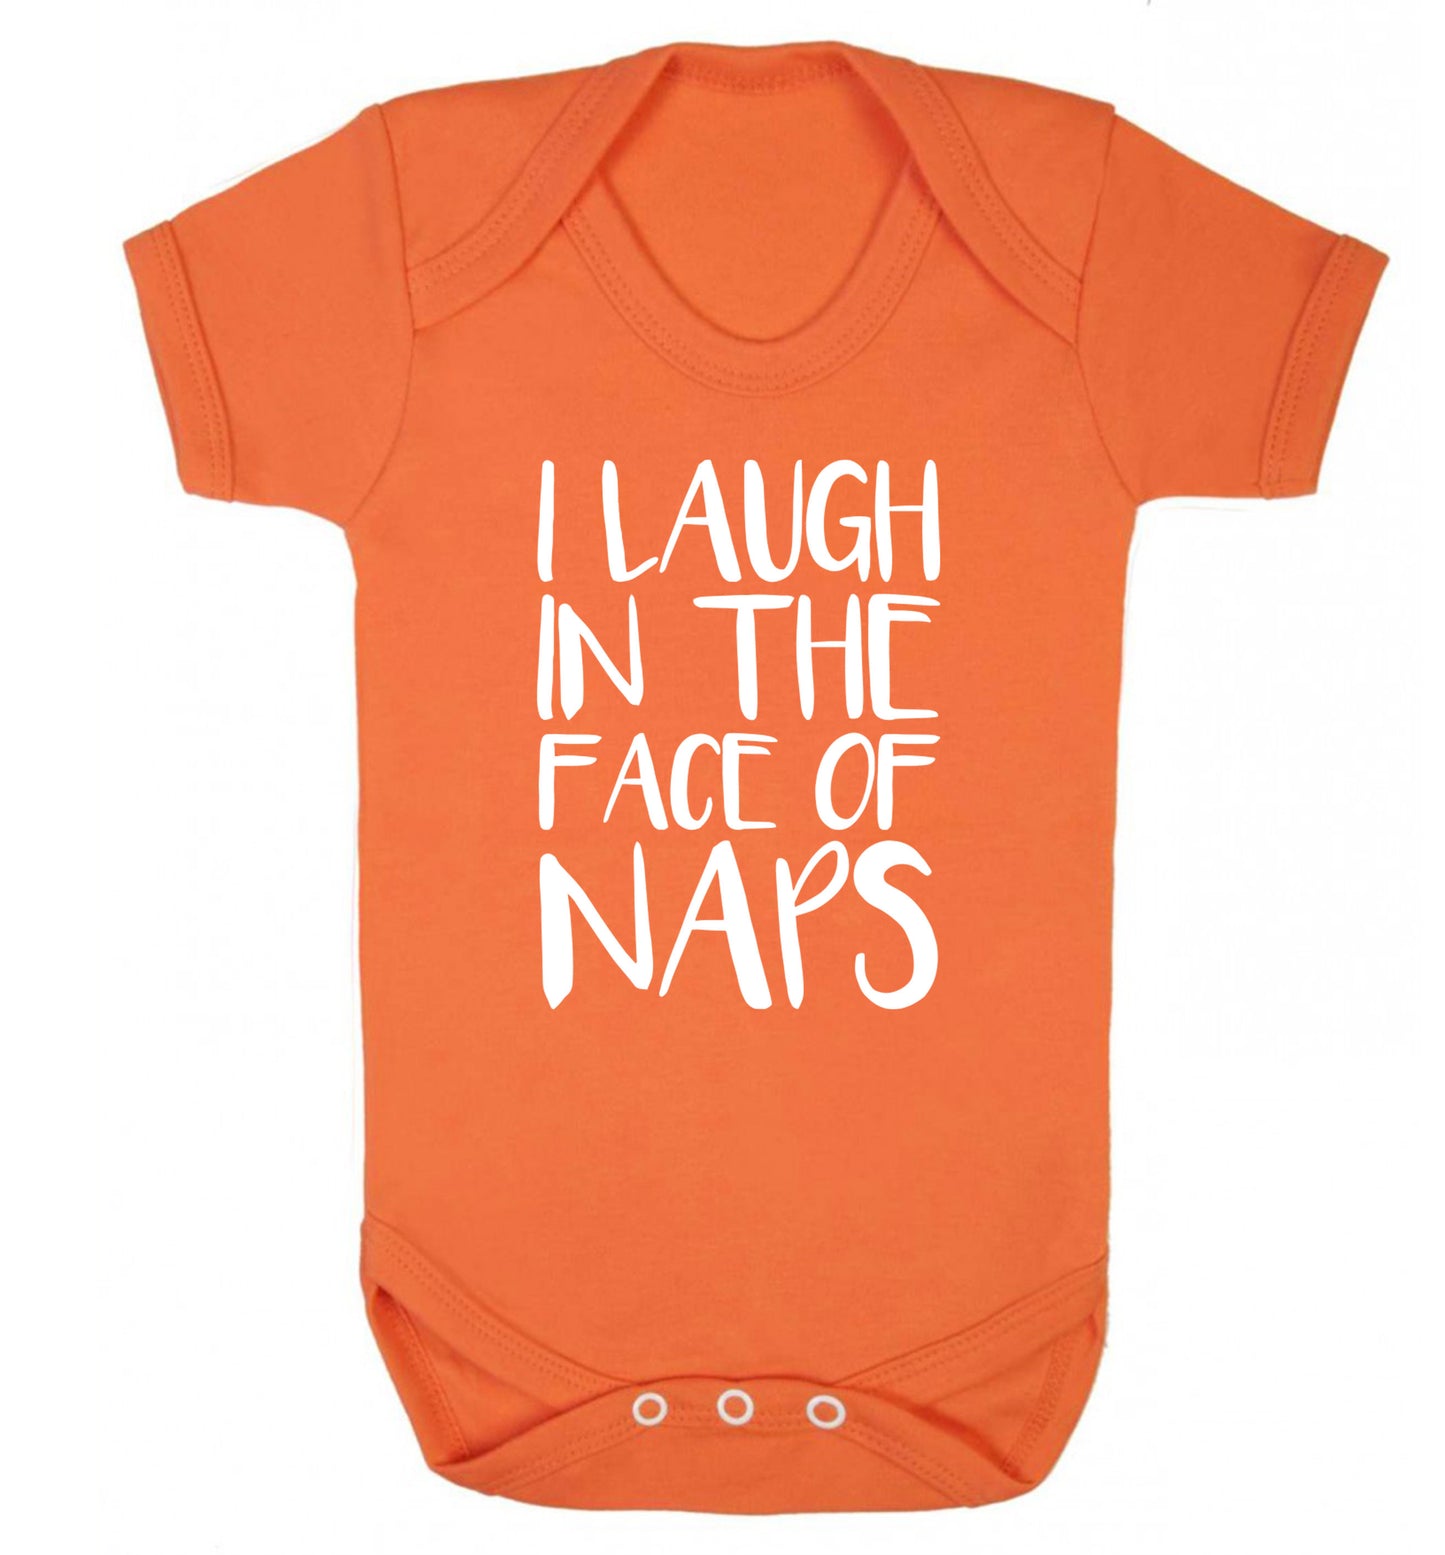 I laugh in the face of naps Baby Vest orange 18-24 months